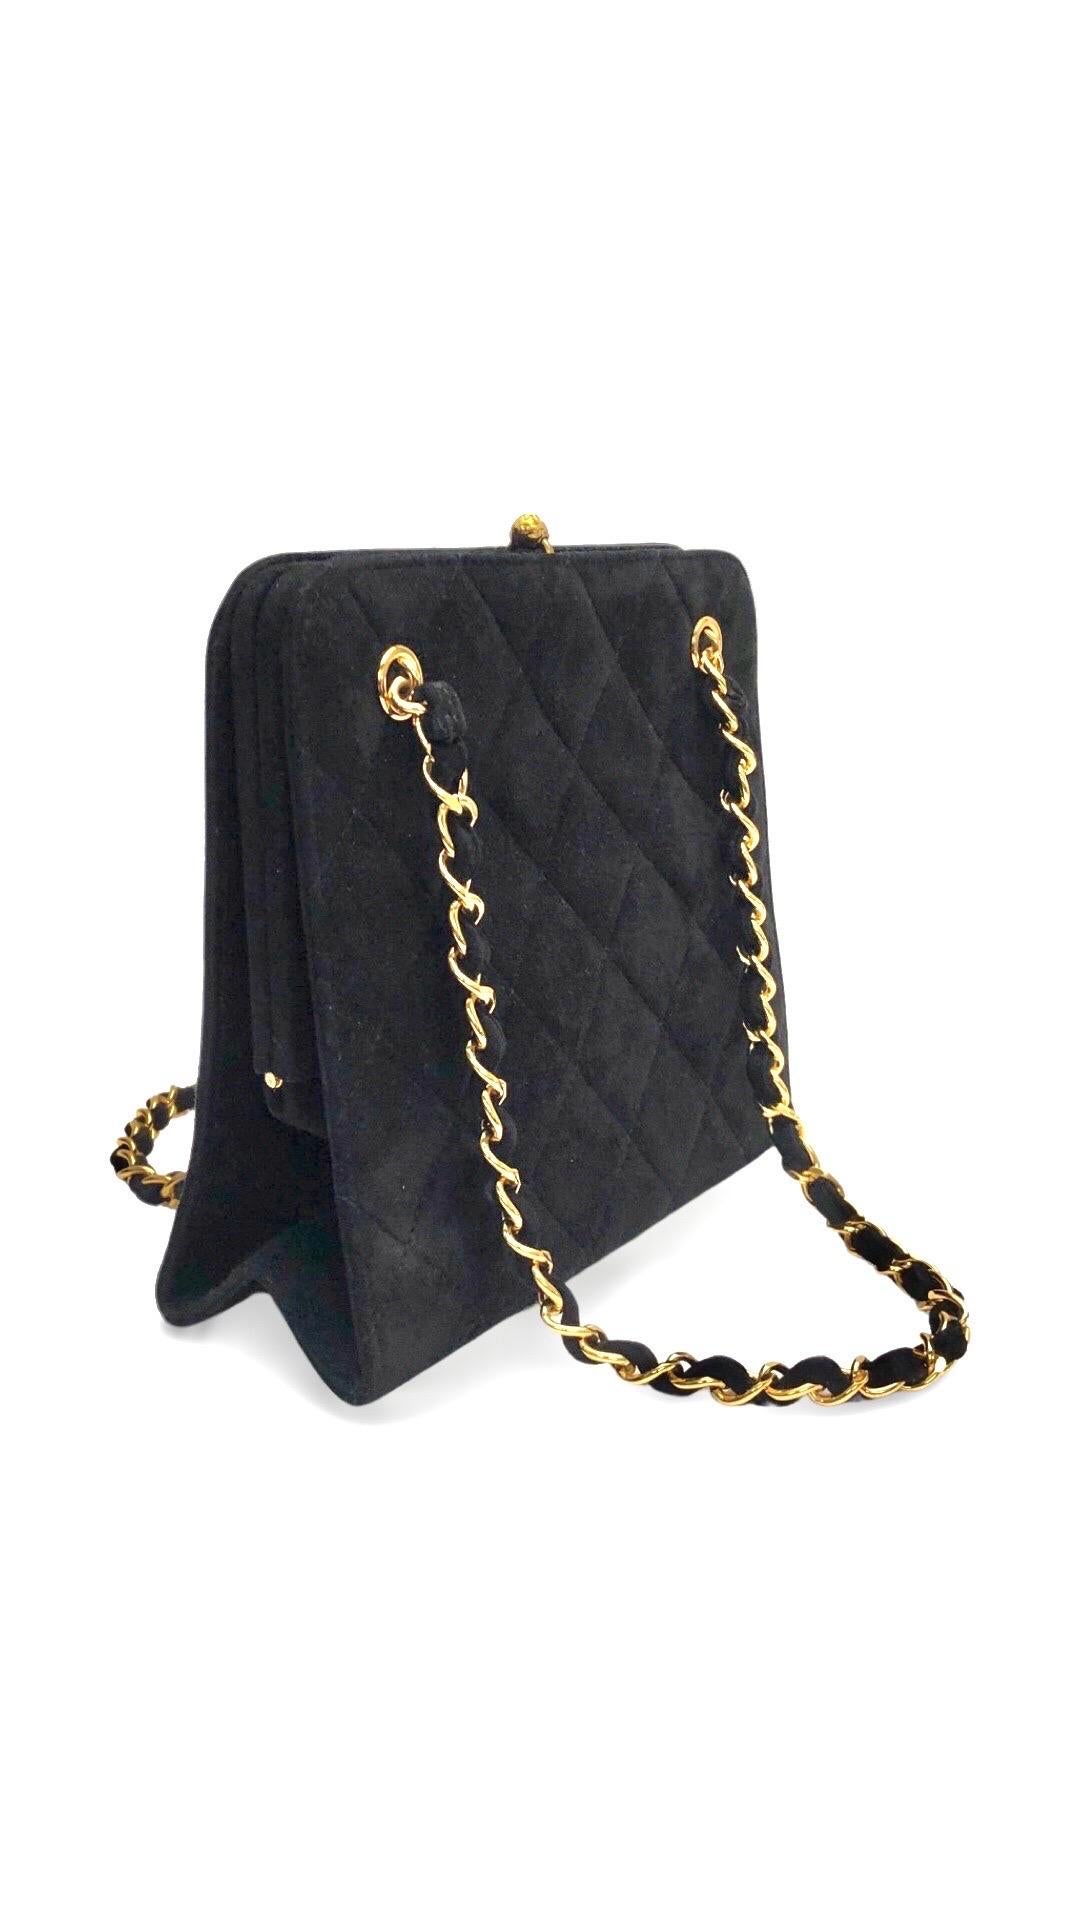 - Chanel black suede quilted gold toned chain handbag from year 1996 to 1997 collection. 

- Featuring a gold toned 